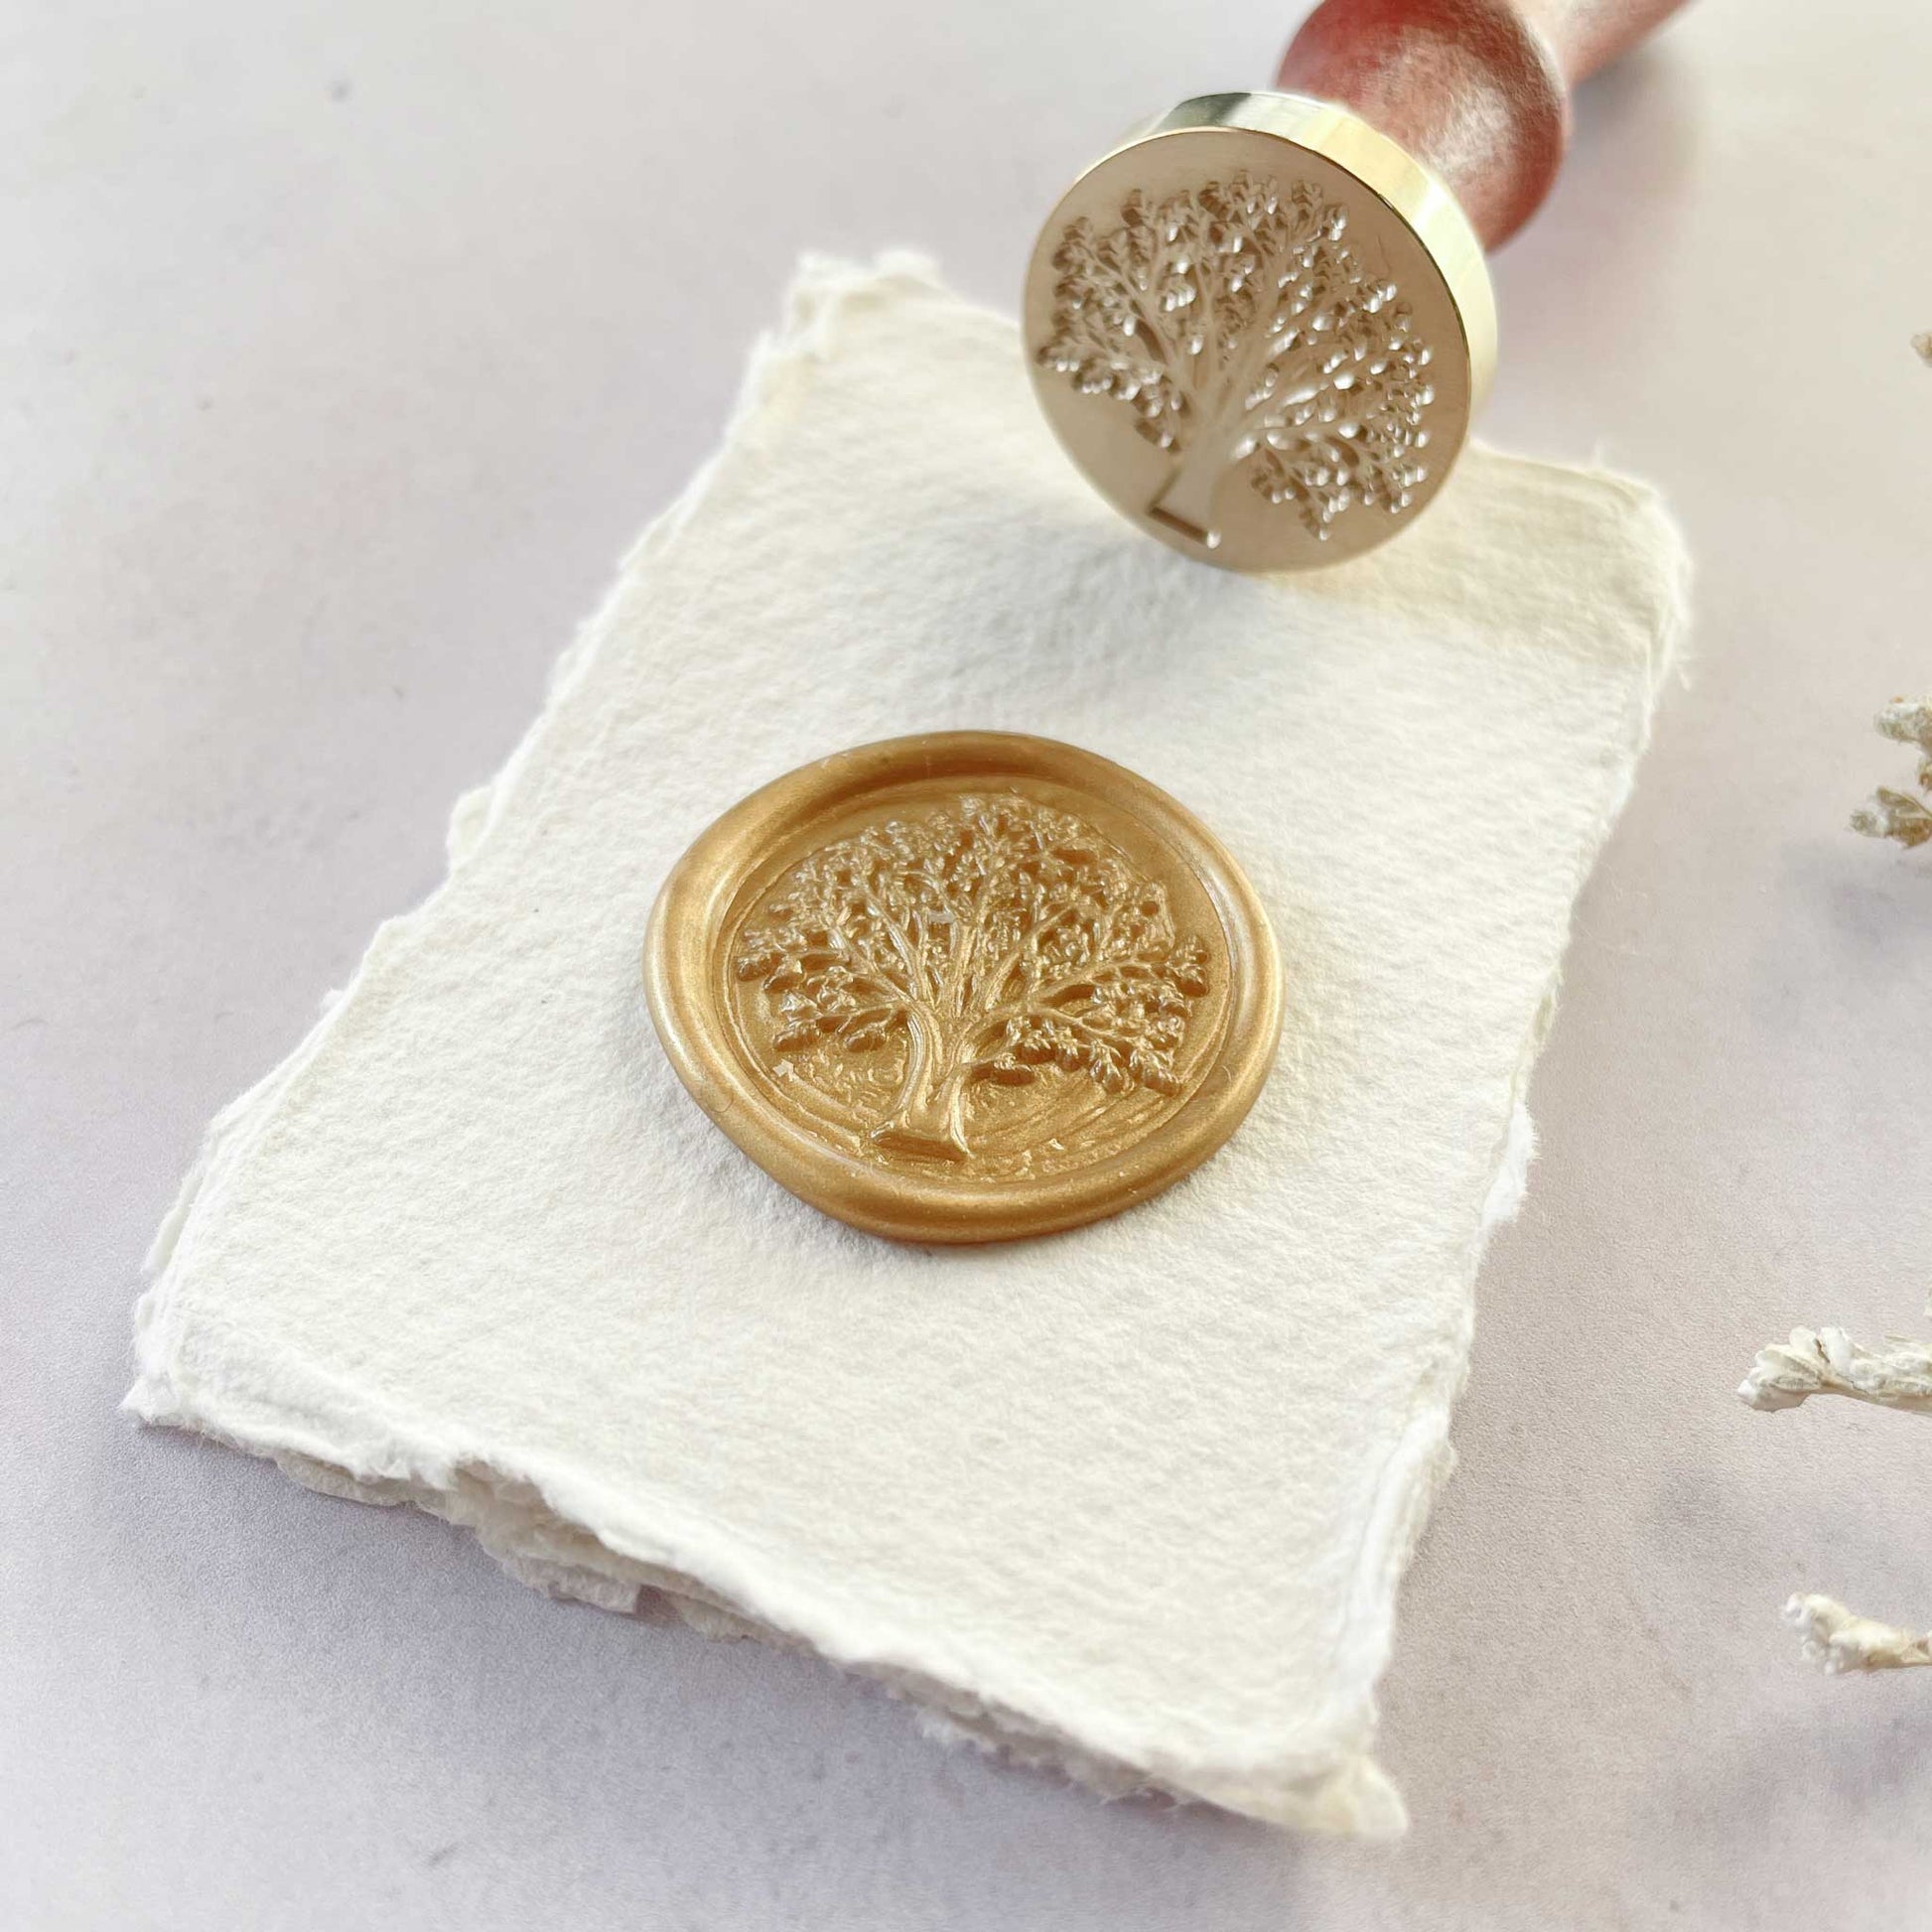 Make tree design wax seals with The Tree of Life sealing wax stamp by The Natural Paper Company.  Brass stamp with a wooden handle.